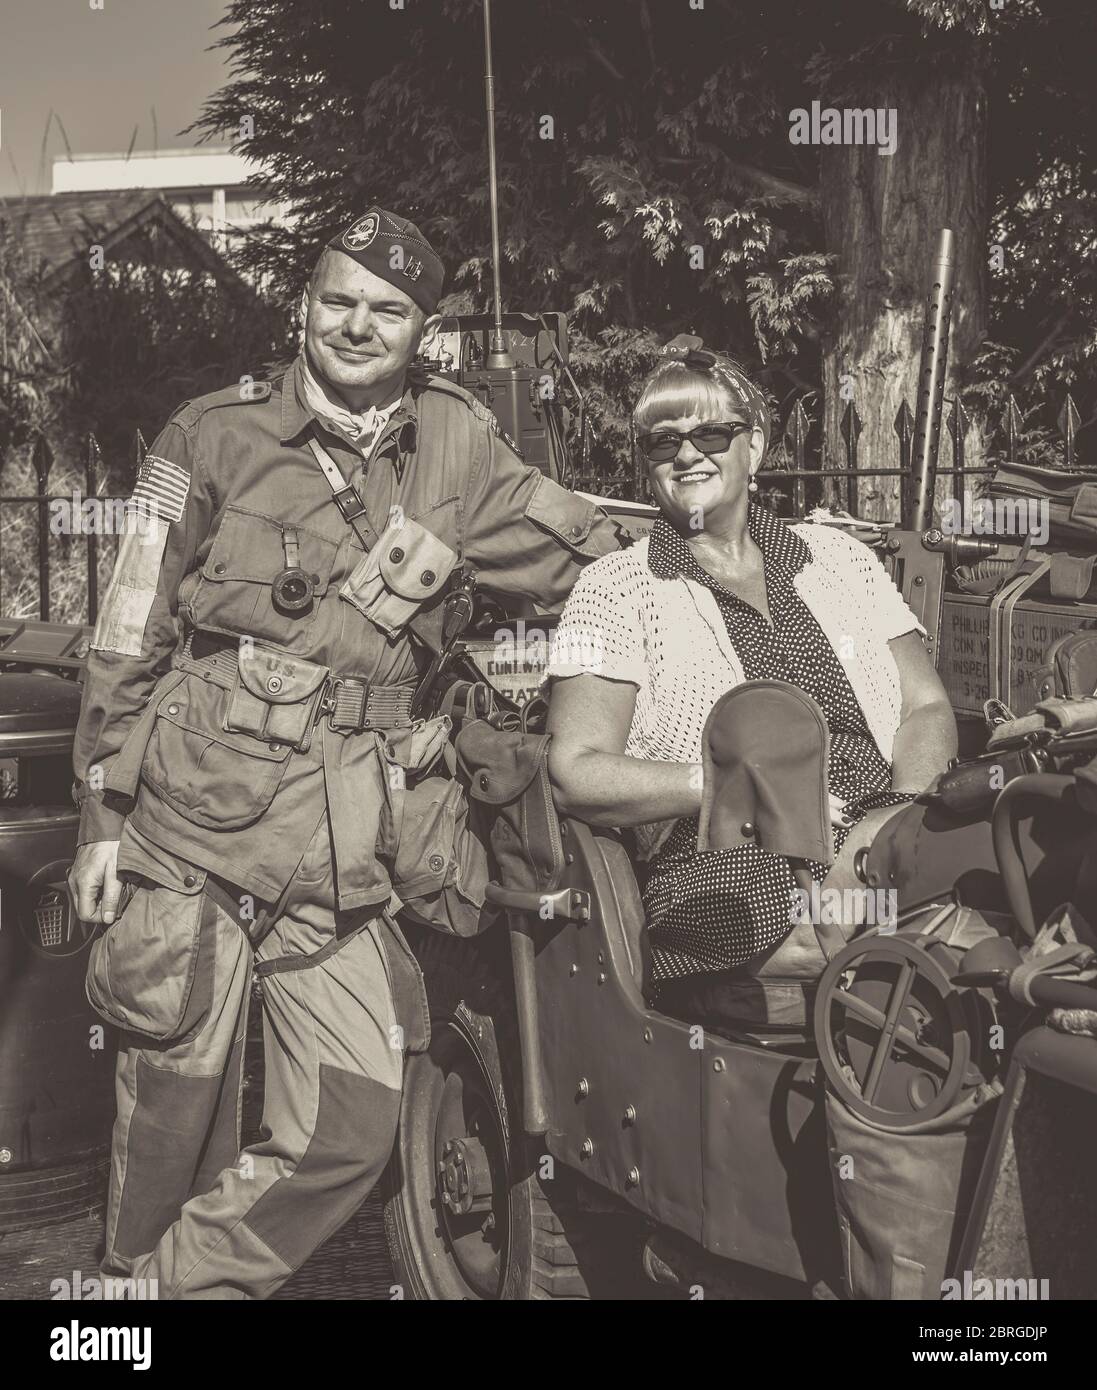 Severn Valley Railway 1940s summer event. 1940s man in US army uniform and 1940s woman sitting in Willy's jeep. Stock Photo